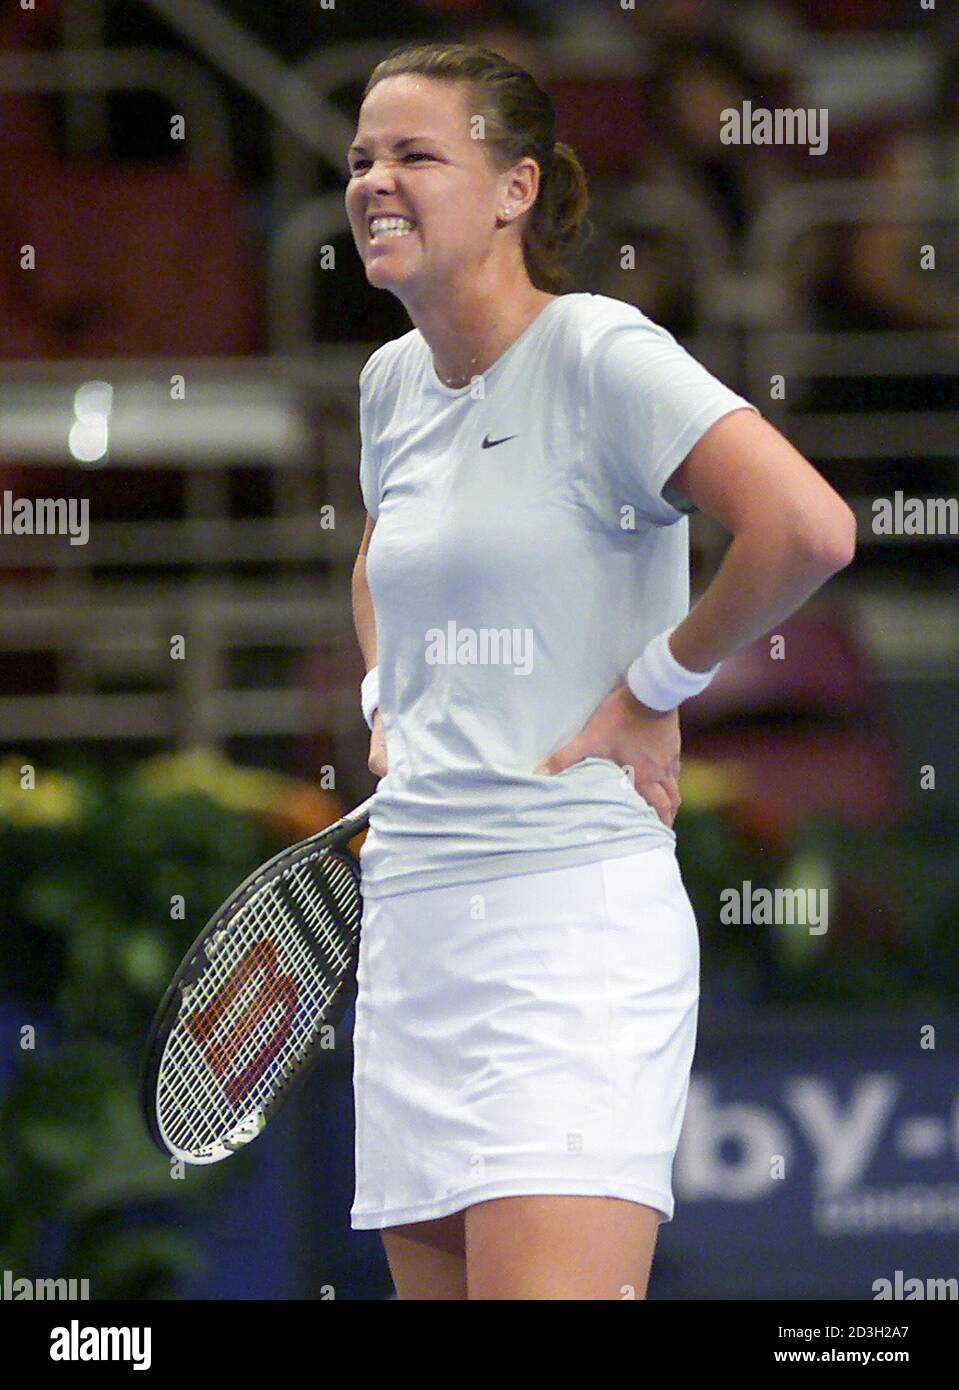 Lindsay Davenport of the United States reacts to a lost point during the second set of her first round match against Elena from Russia at the Championships the WTA